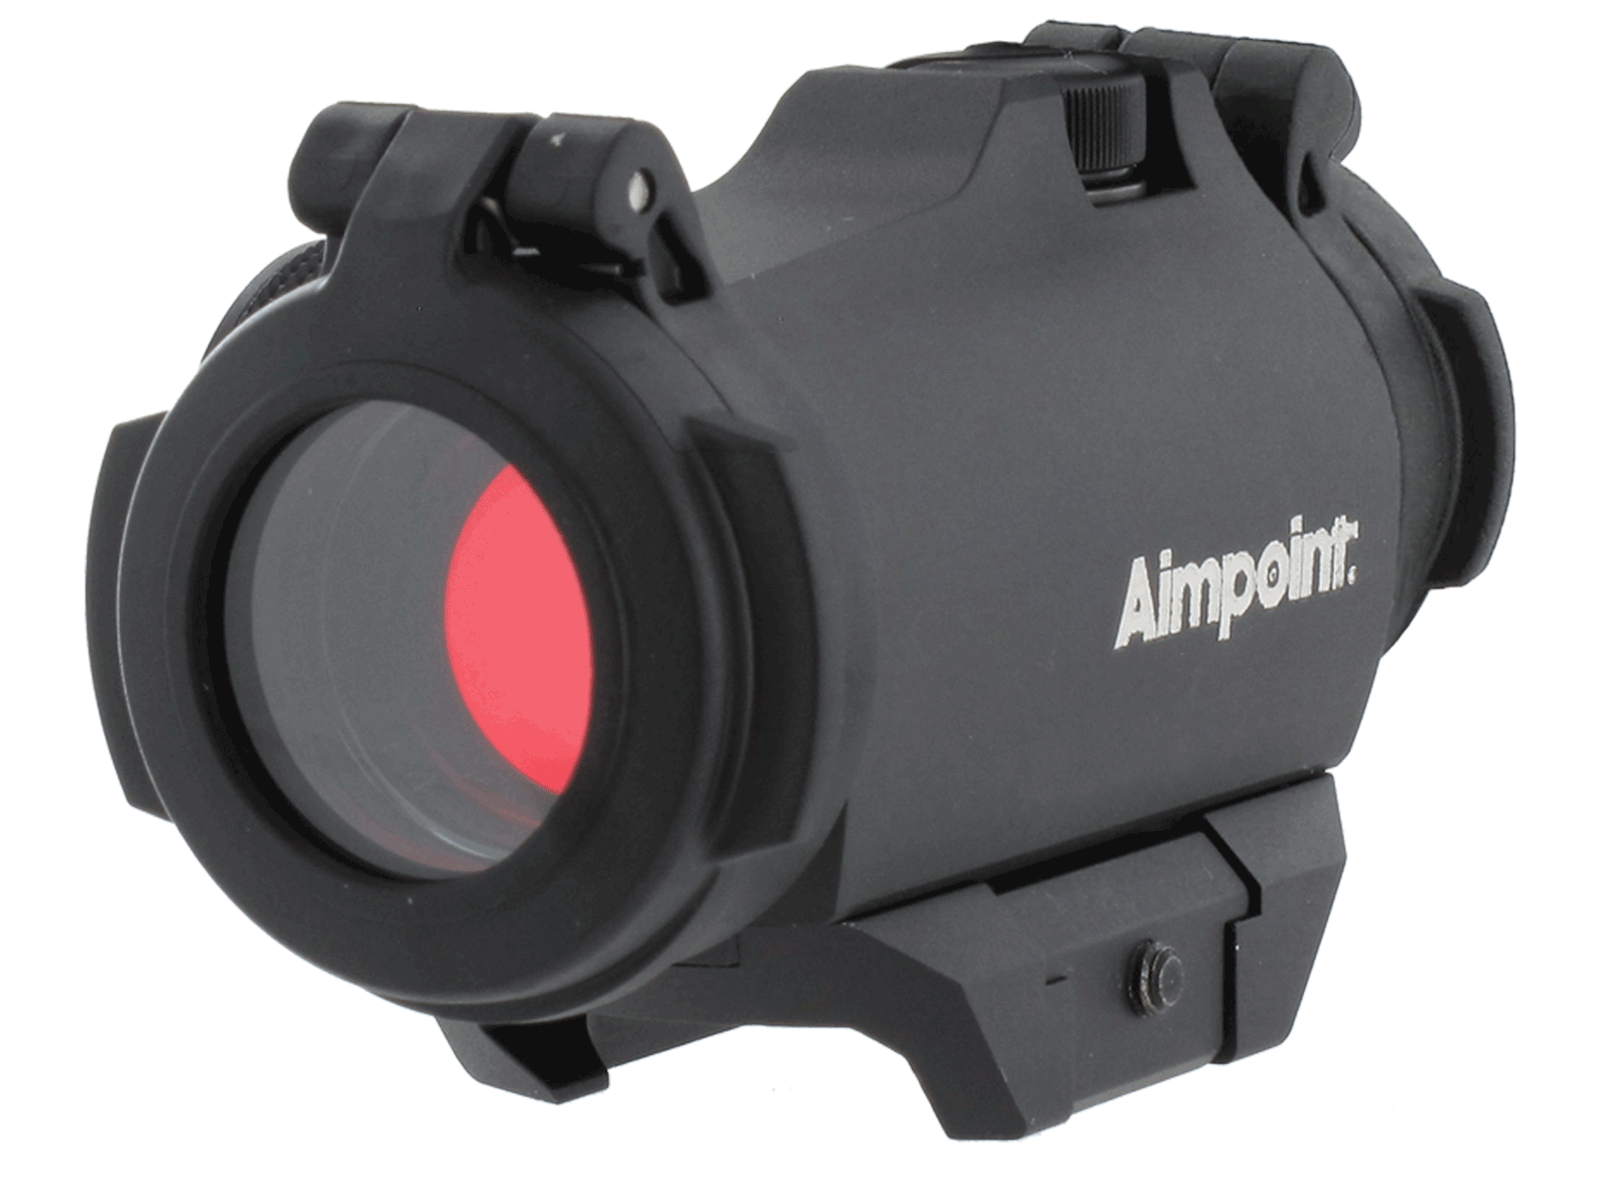 Aimpoint H-2 6 MOA / Schwarz / incl. Adapter Weaver / Picatinny 